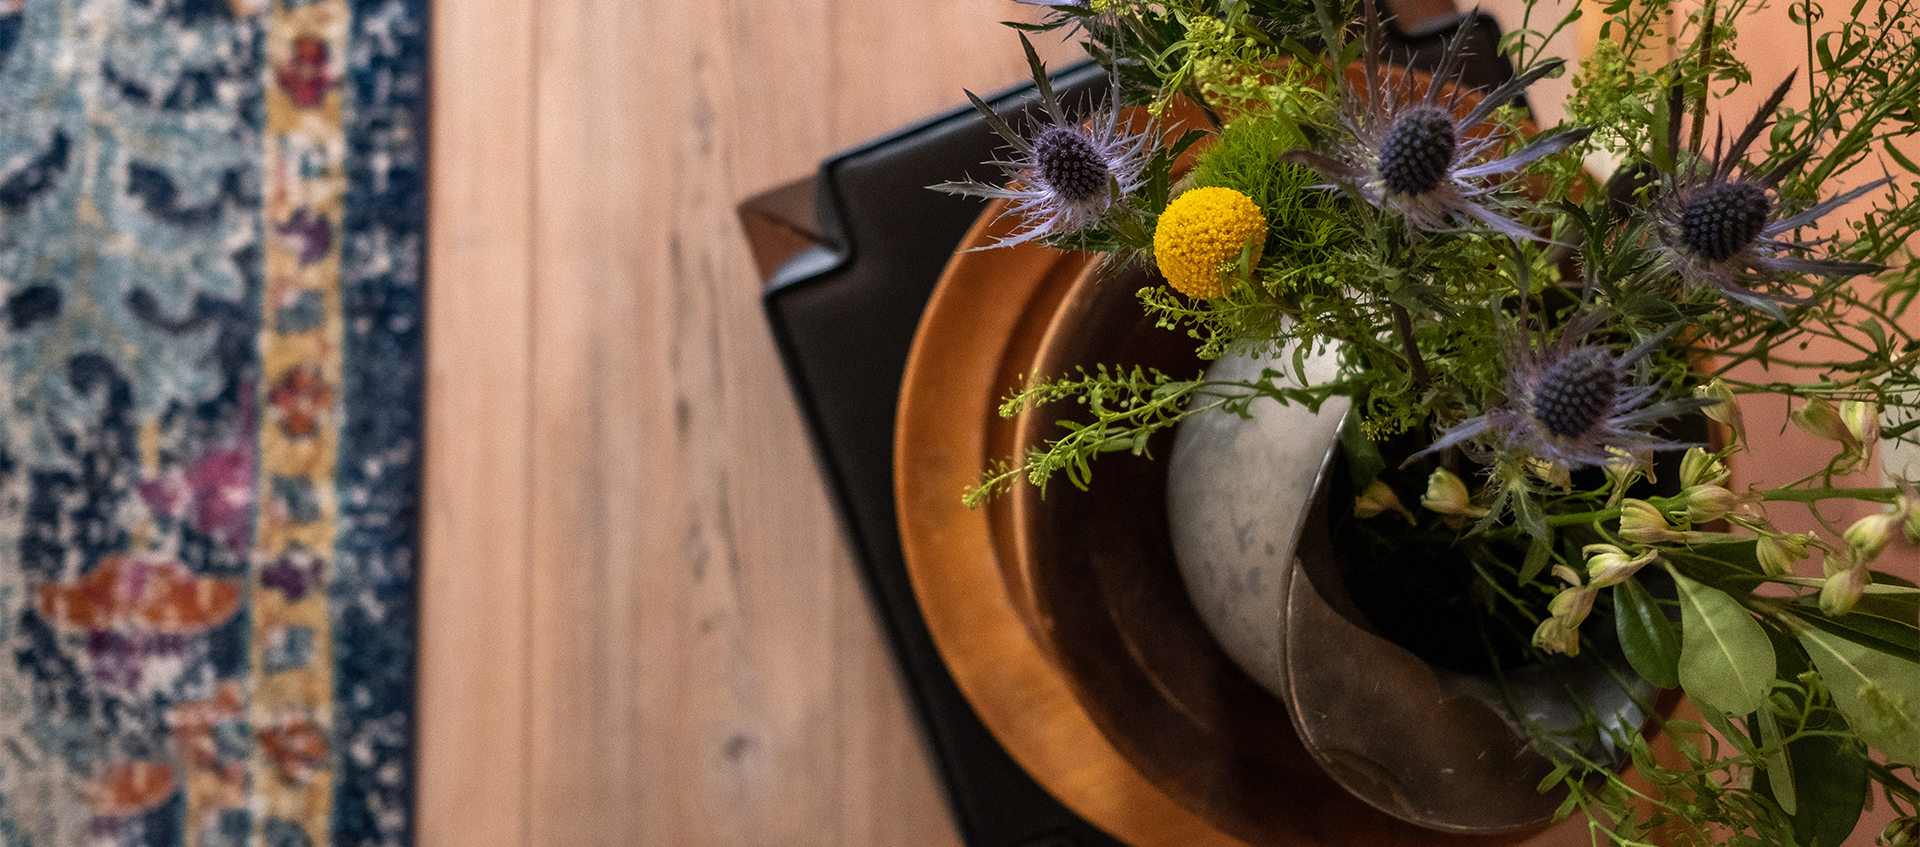 A floral arrangement of yellow craspedia and purple sea holly sits on a copper-colored tray on a small black chair as seen from above